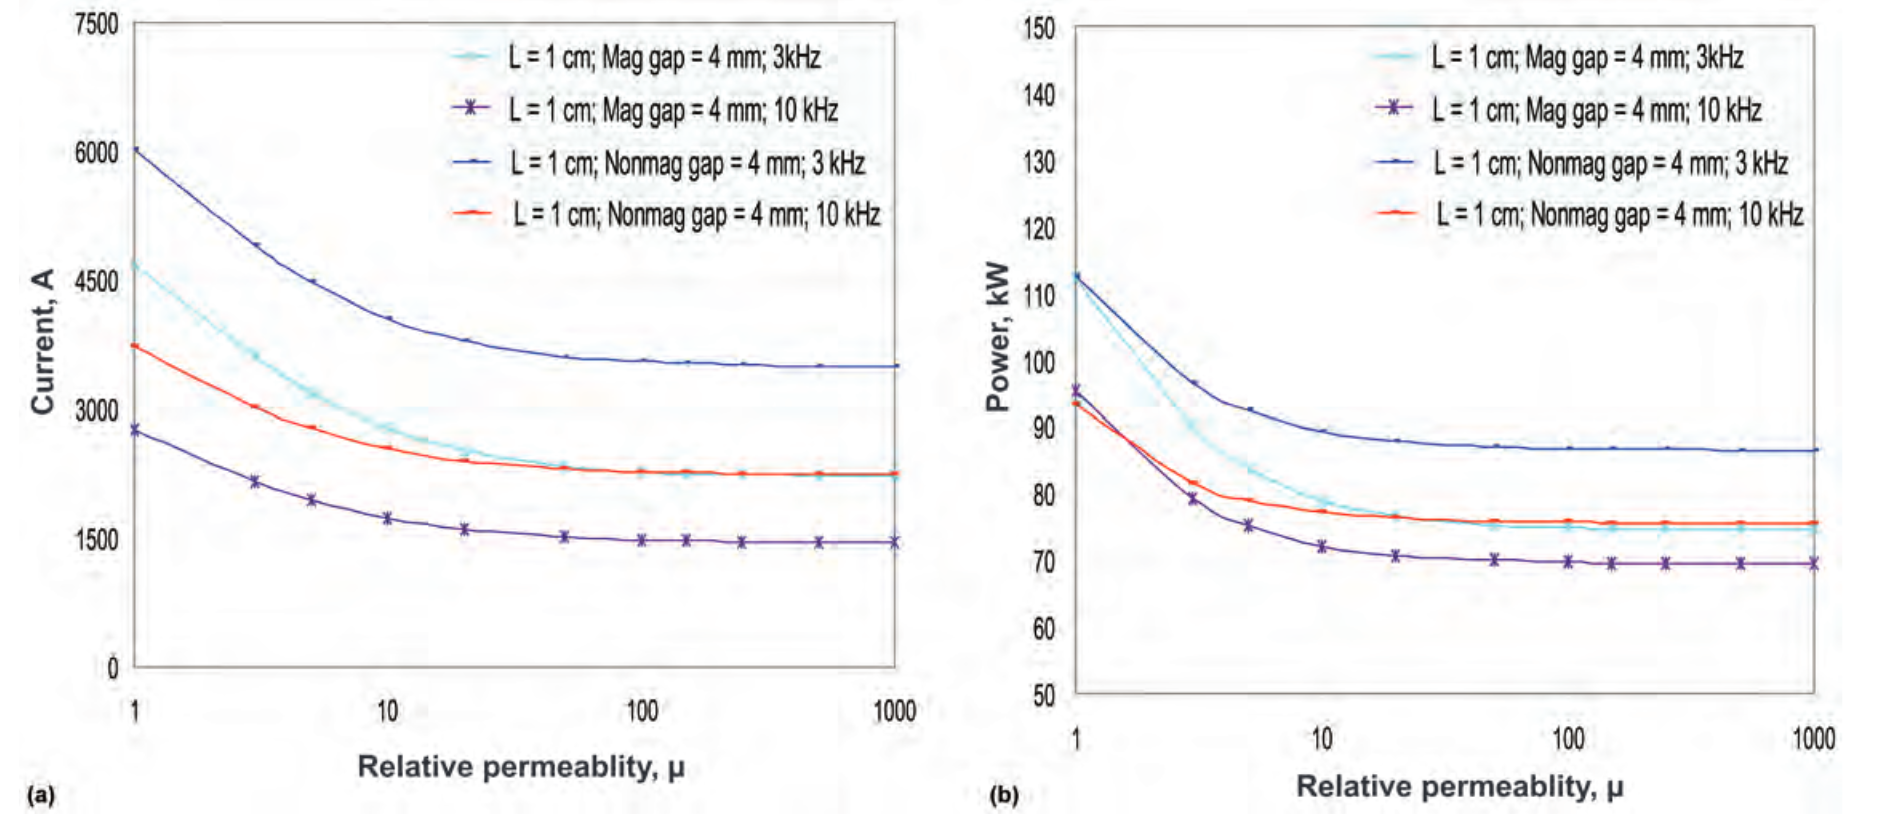 Fluxtrol | Magnetic Flux Controllers in Induction Heating and Melting - Fig. 2 Effect of magnetic permeability on coil current (a) and efficiency (b); curves generated from computer simulation of heating a flat plate using a single leg of an inductor; 50 kW in the part under the coil face. Source: Ref 3.